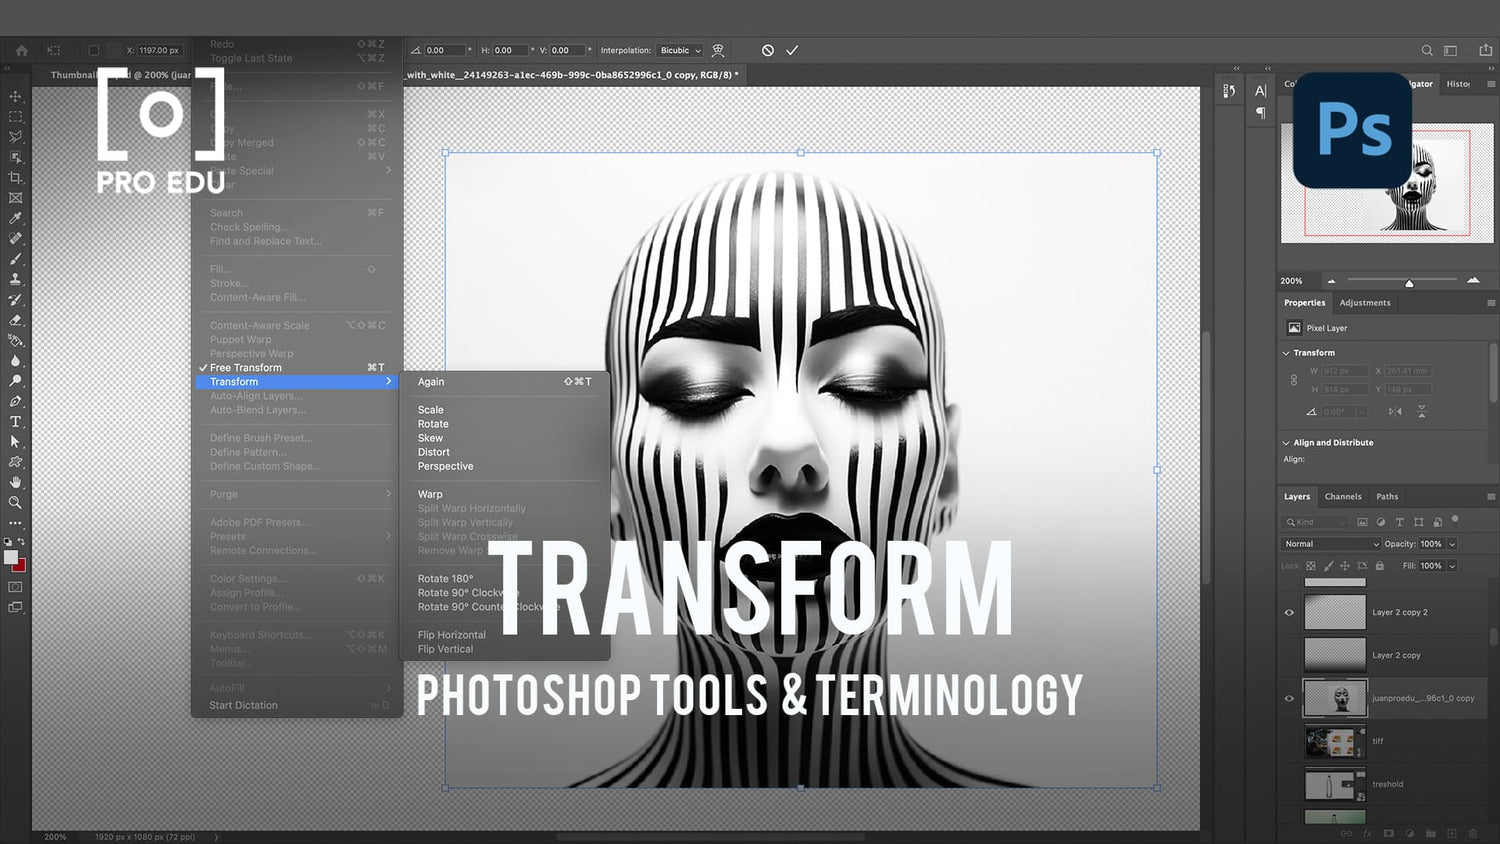 Transform Tool in Photoshop: Reshape Your Images